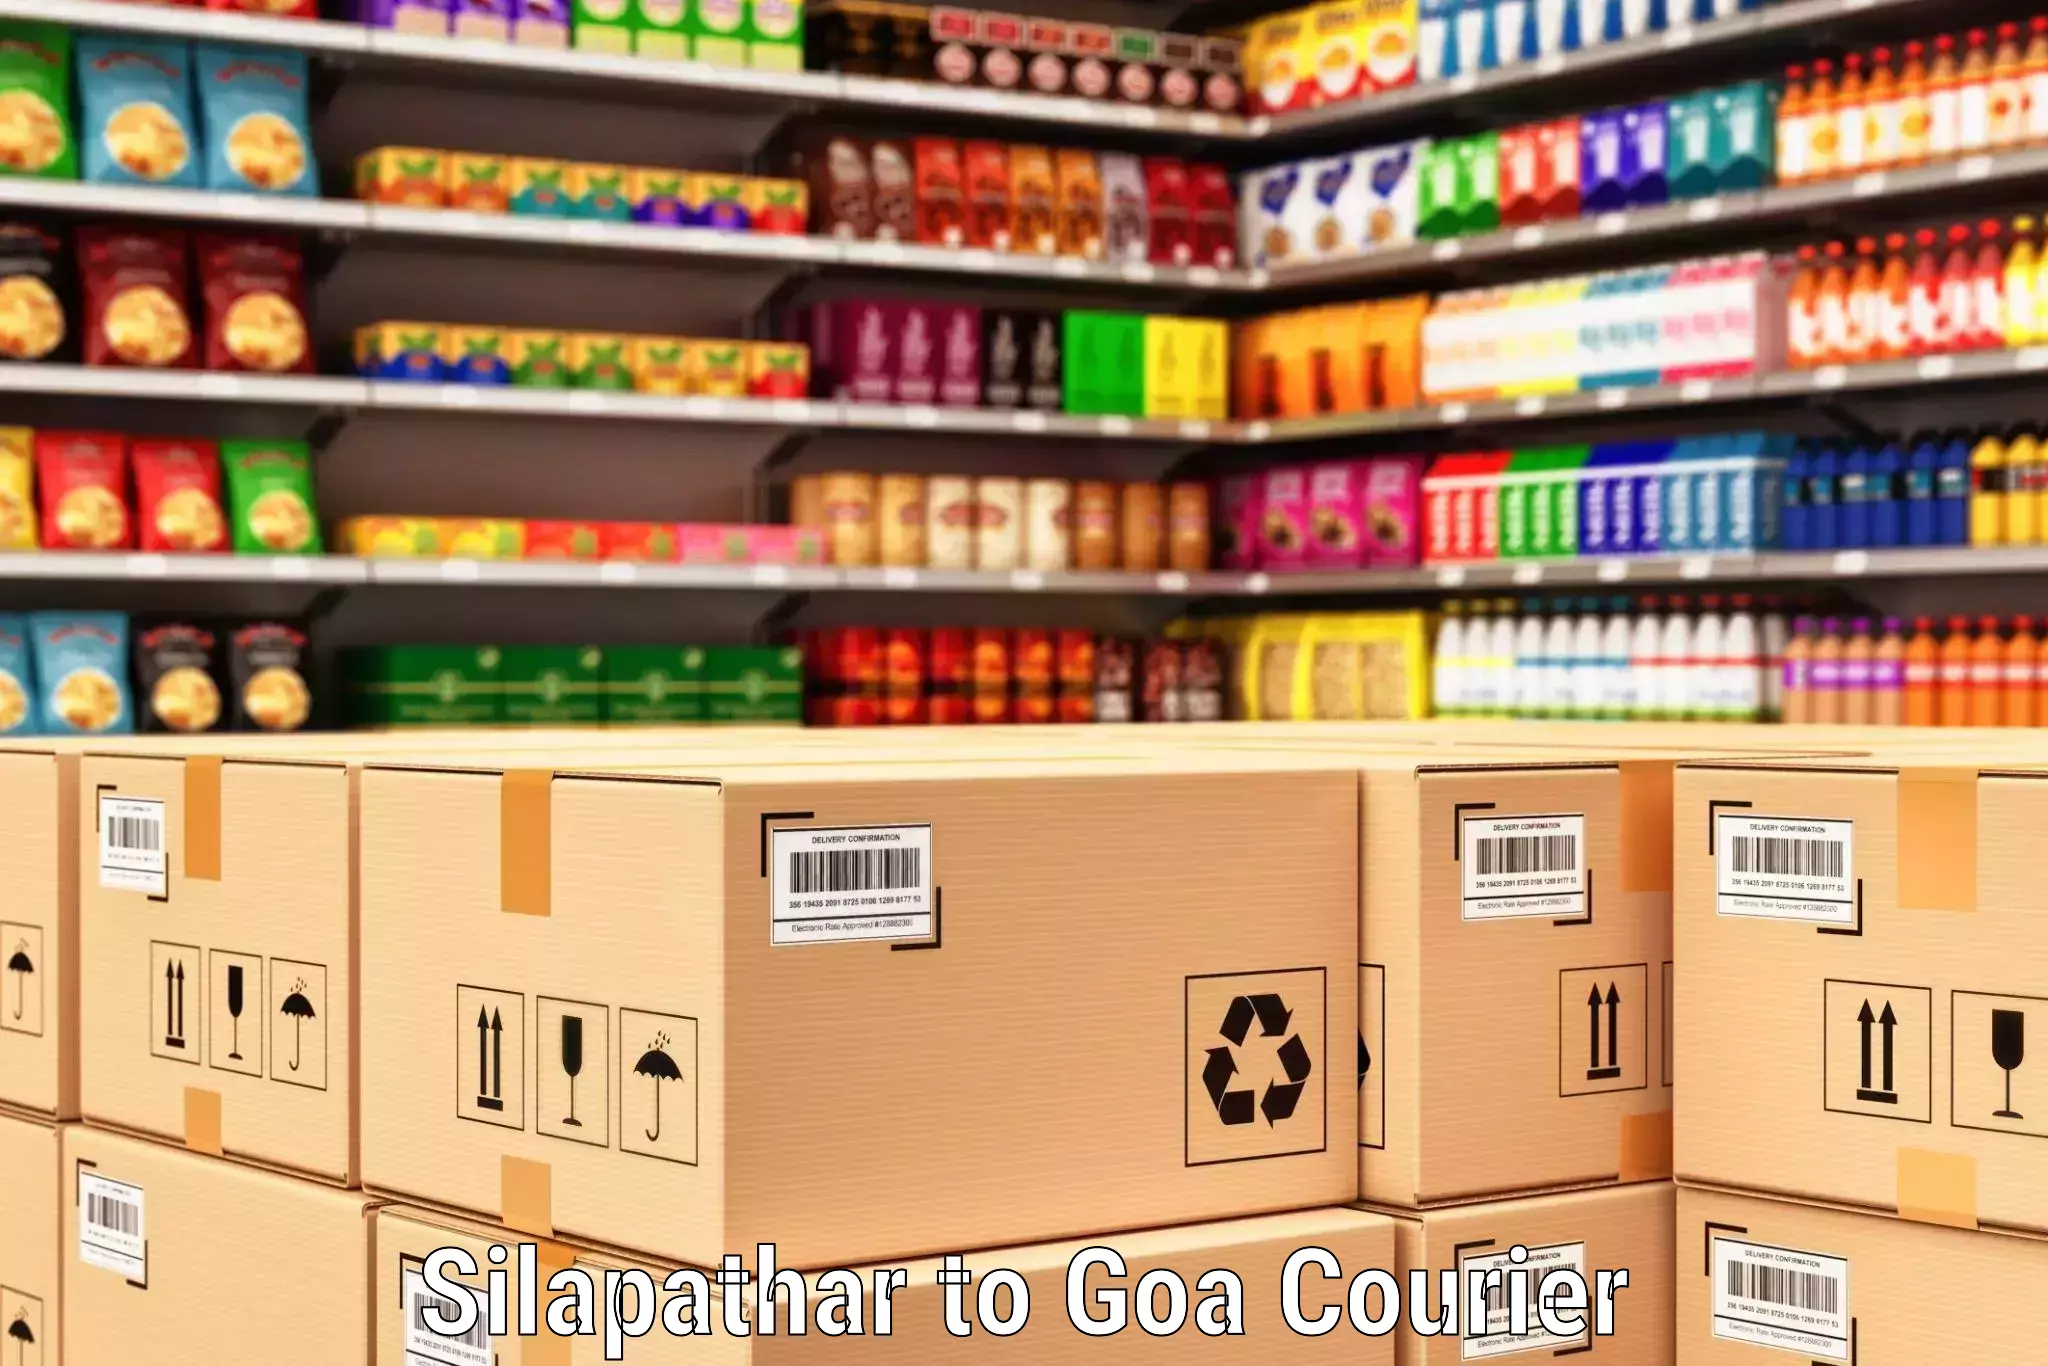 Express package handling Silapathar to South Goa